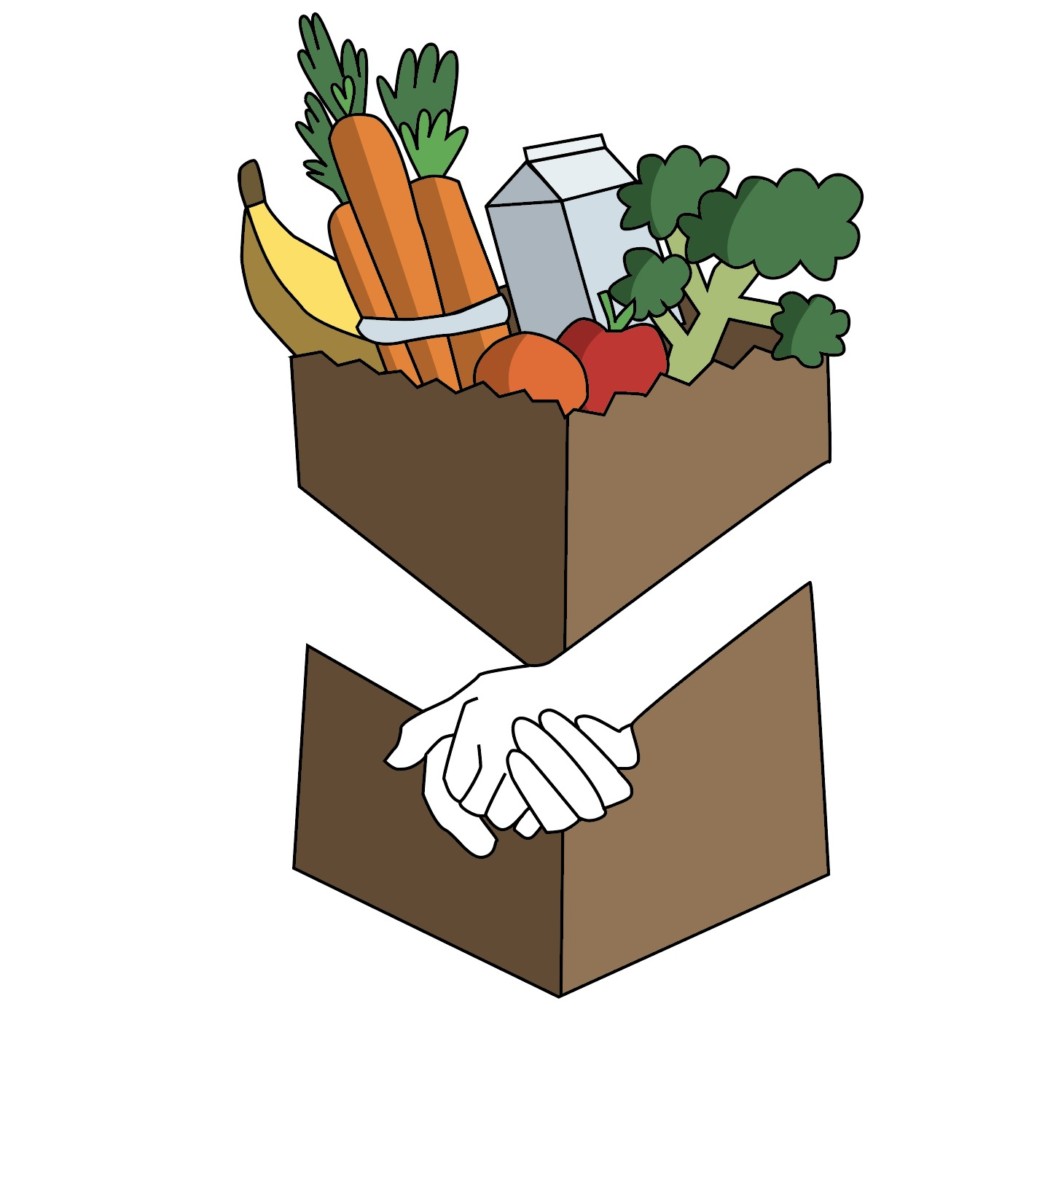 Fairfield County continues to fight food insecurity